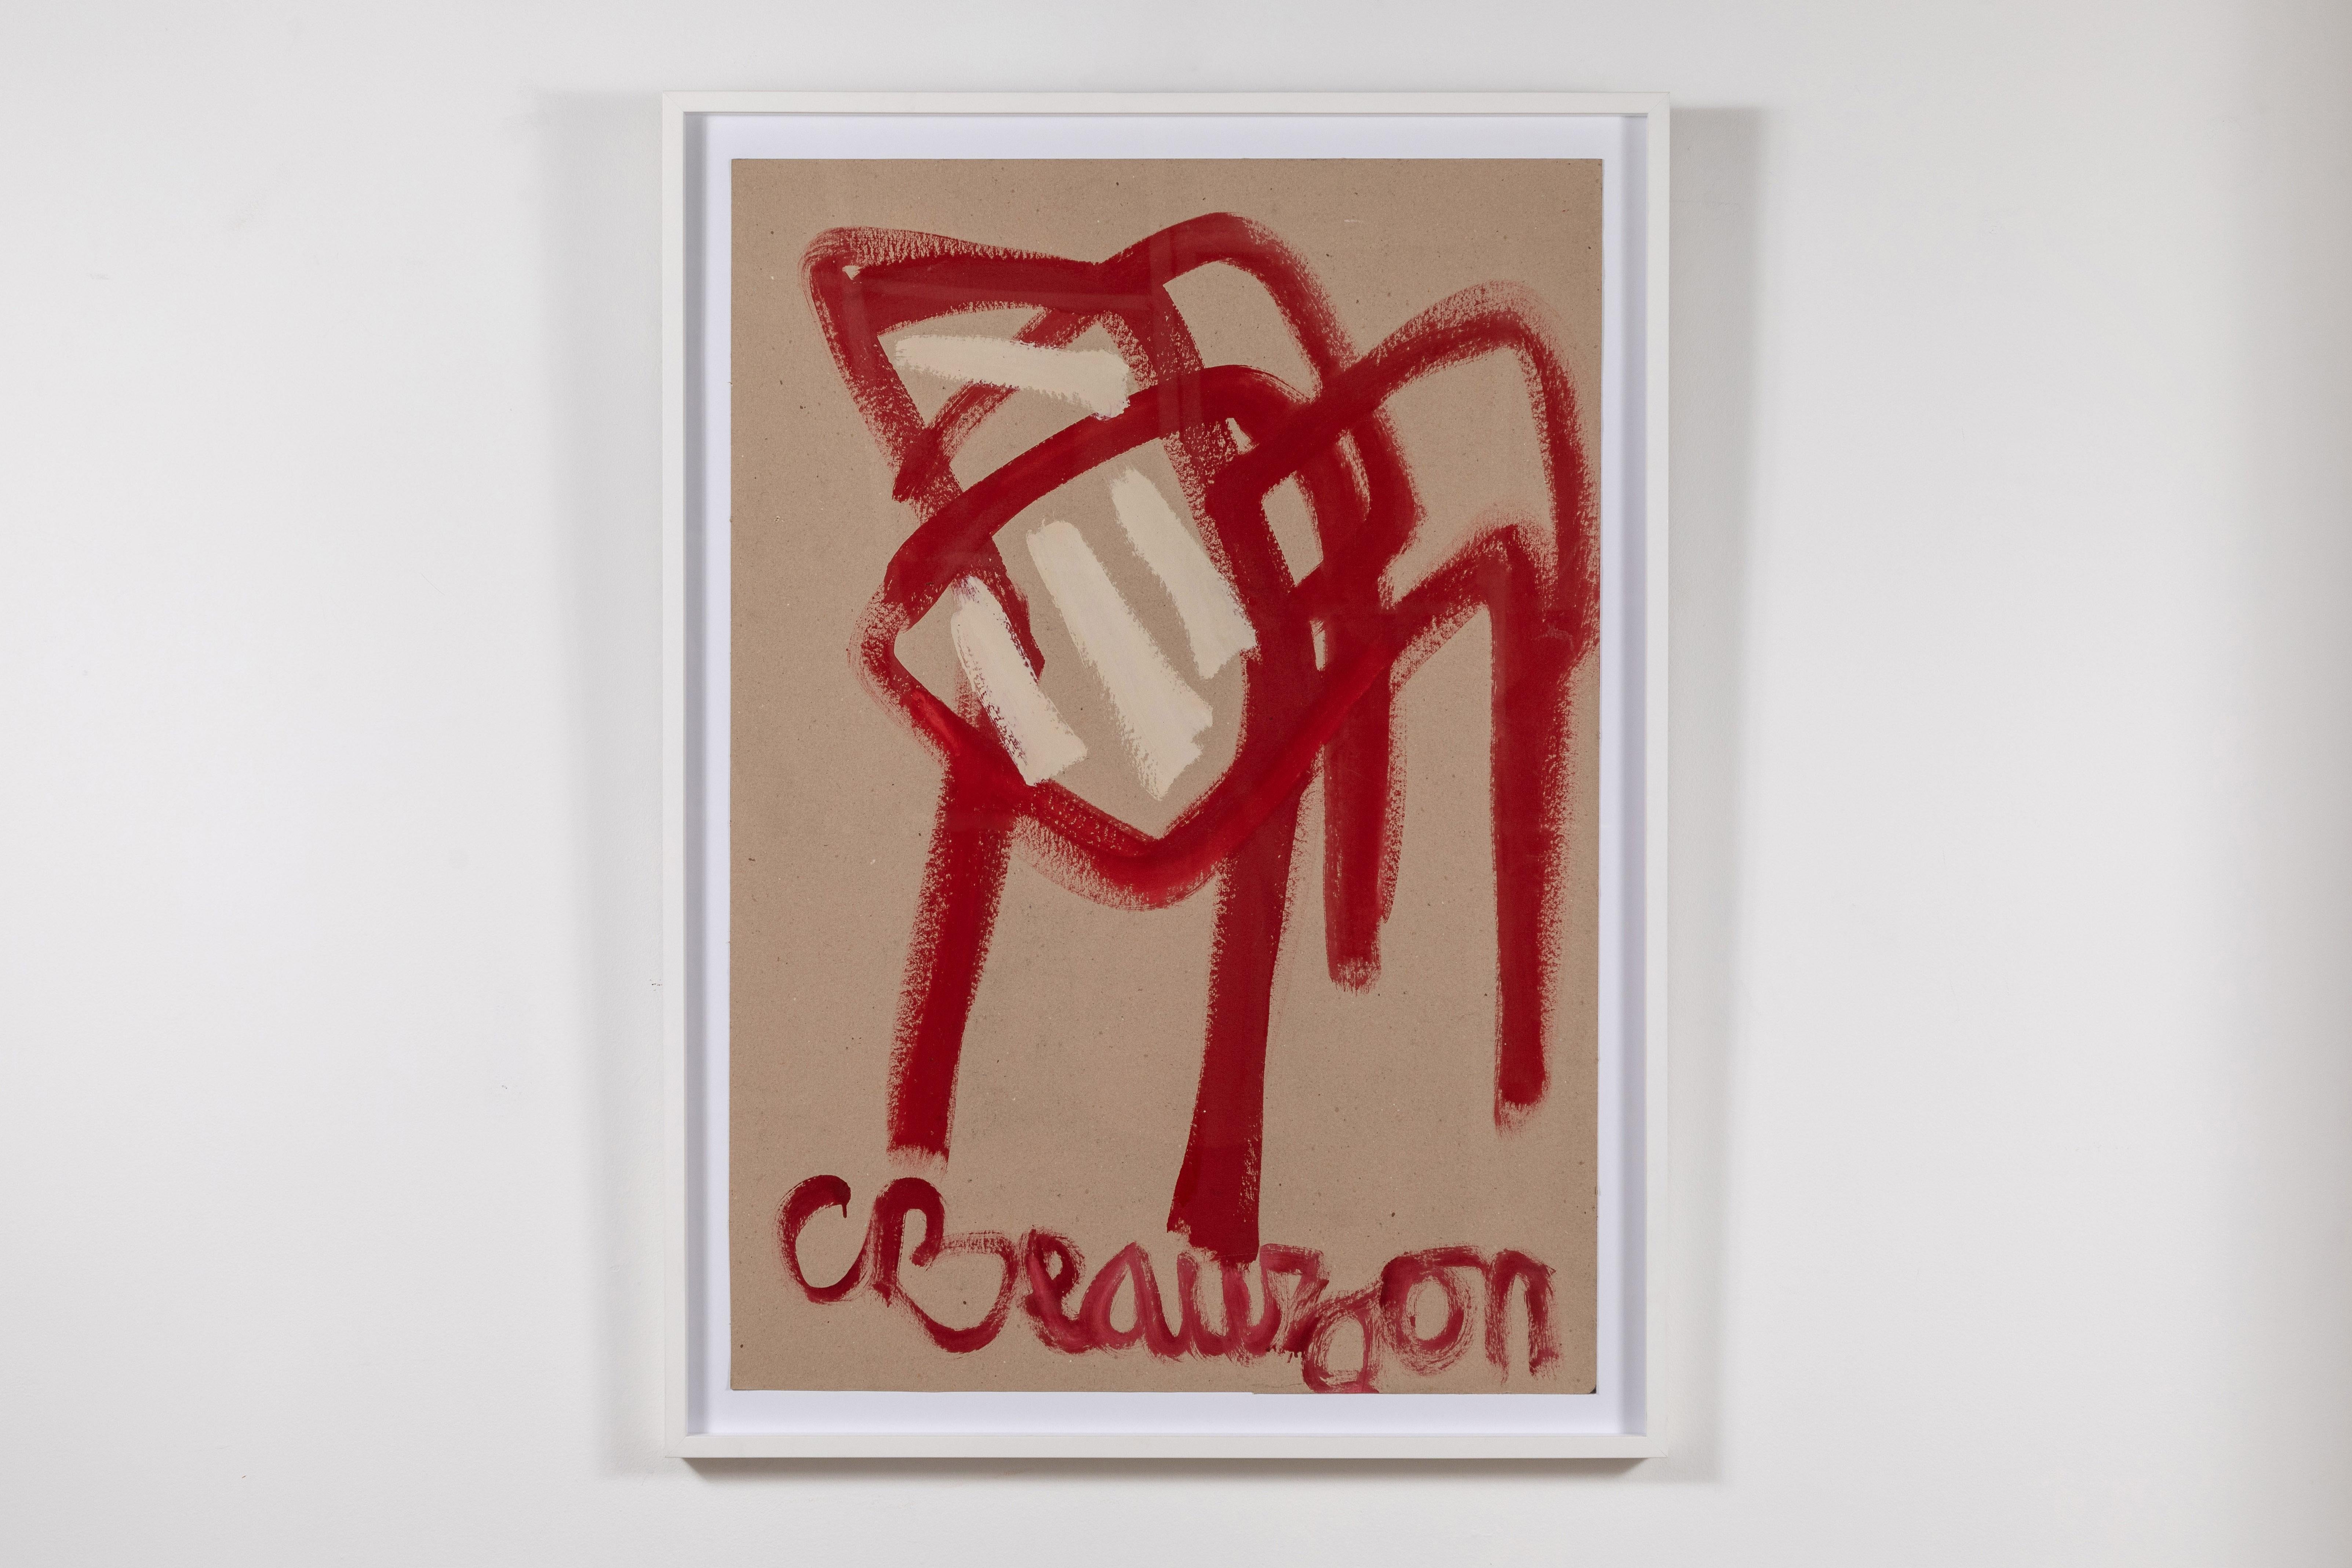 White framed white painting of a red chair by French Artist, Beauzon.